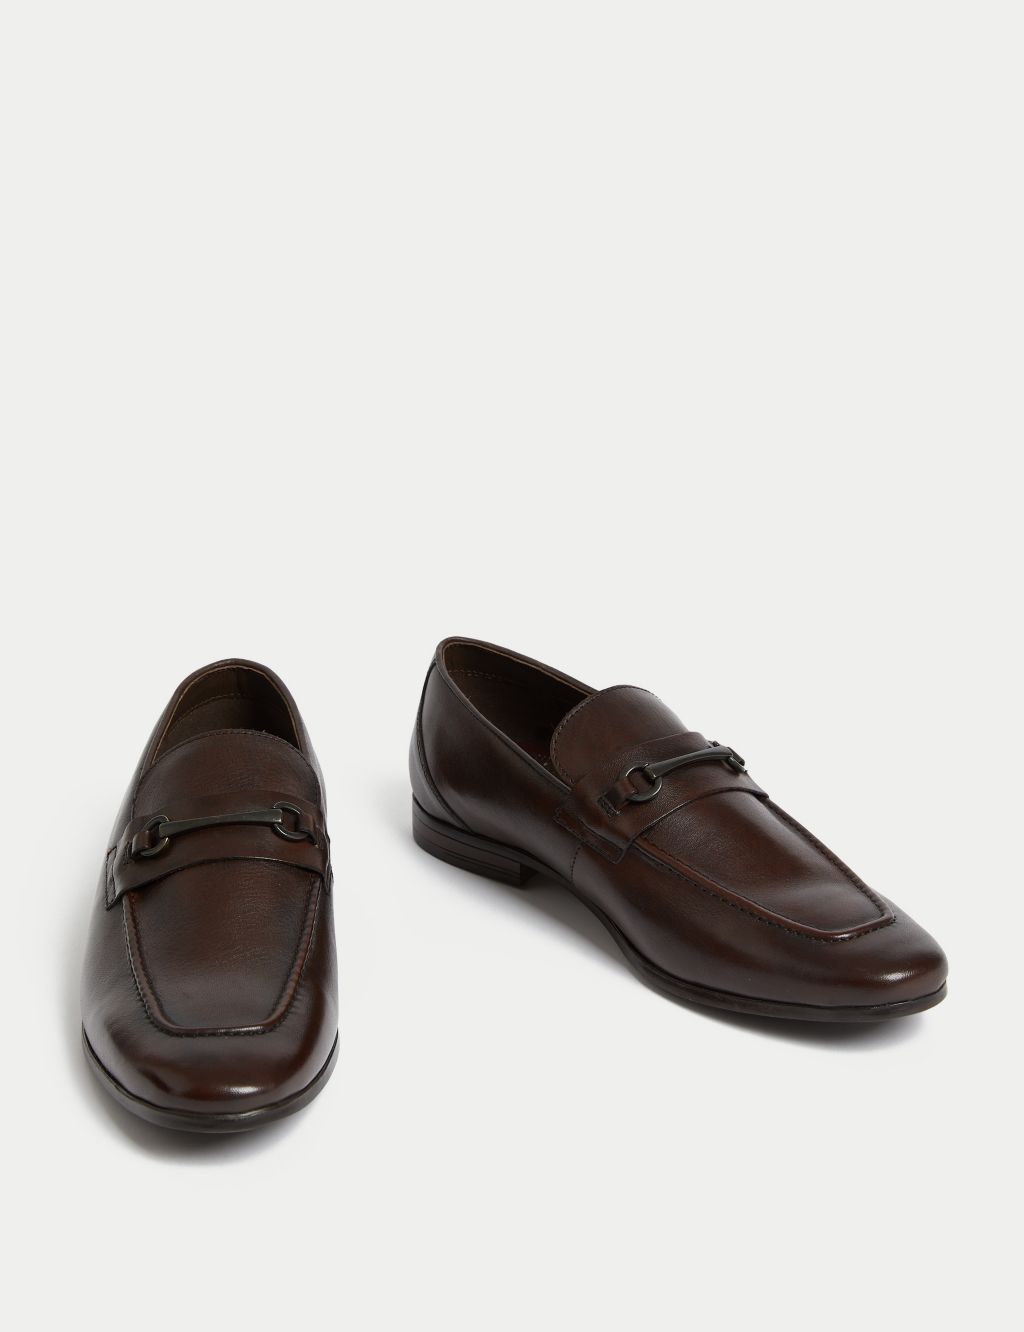 Leather Slip-On Loafers image 2